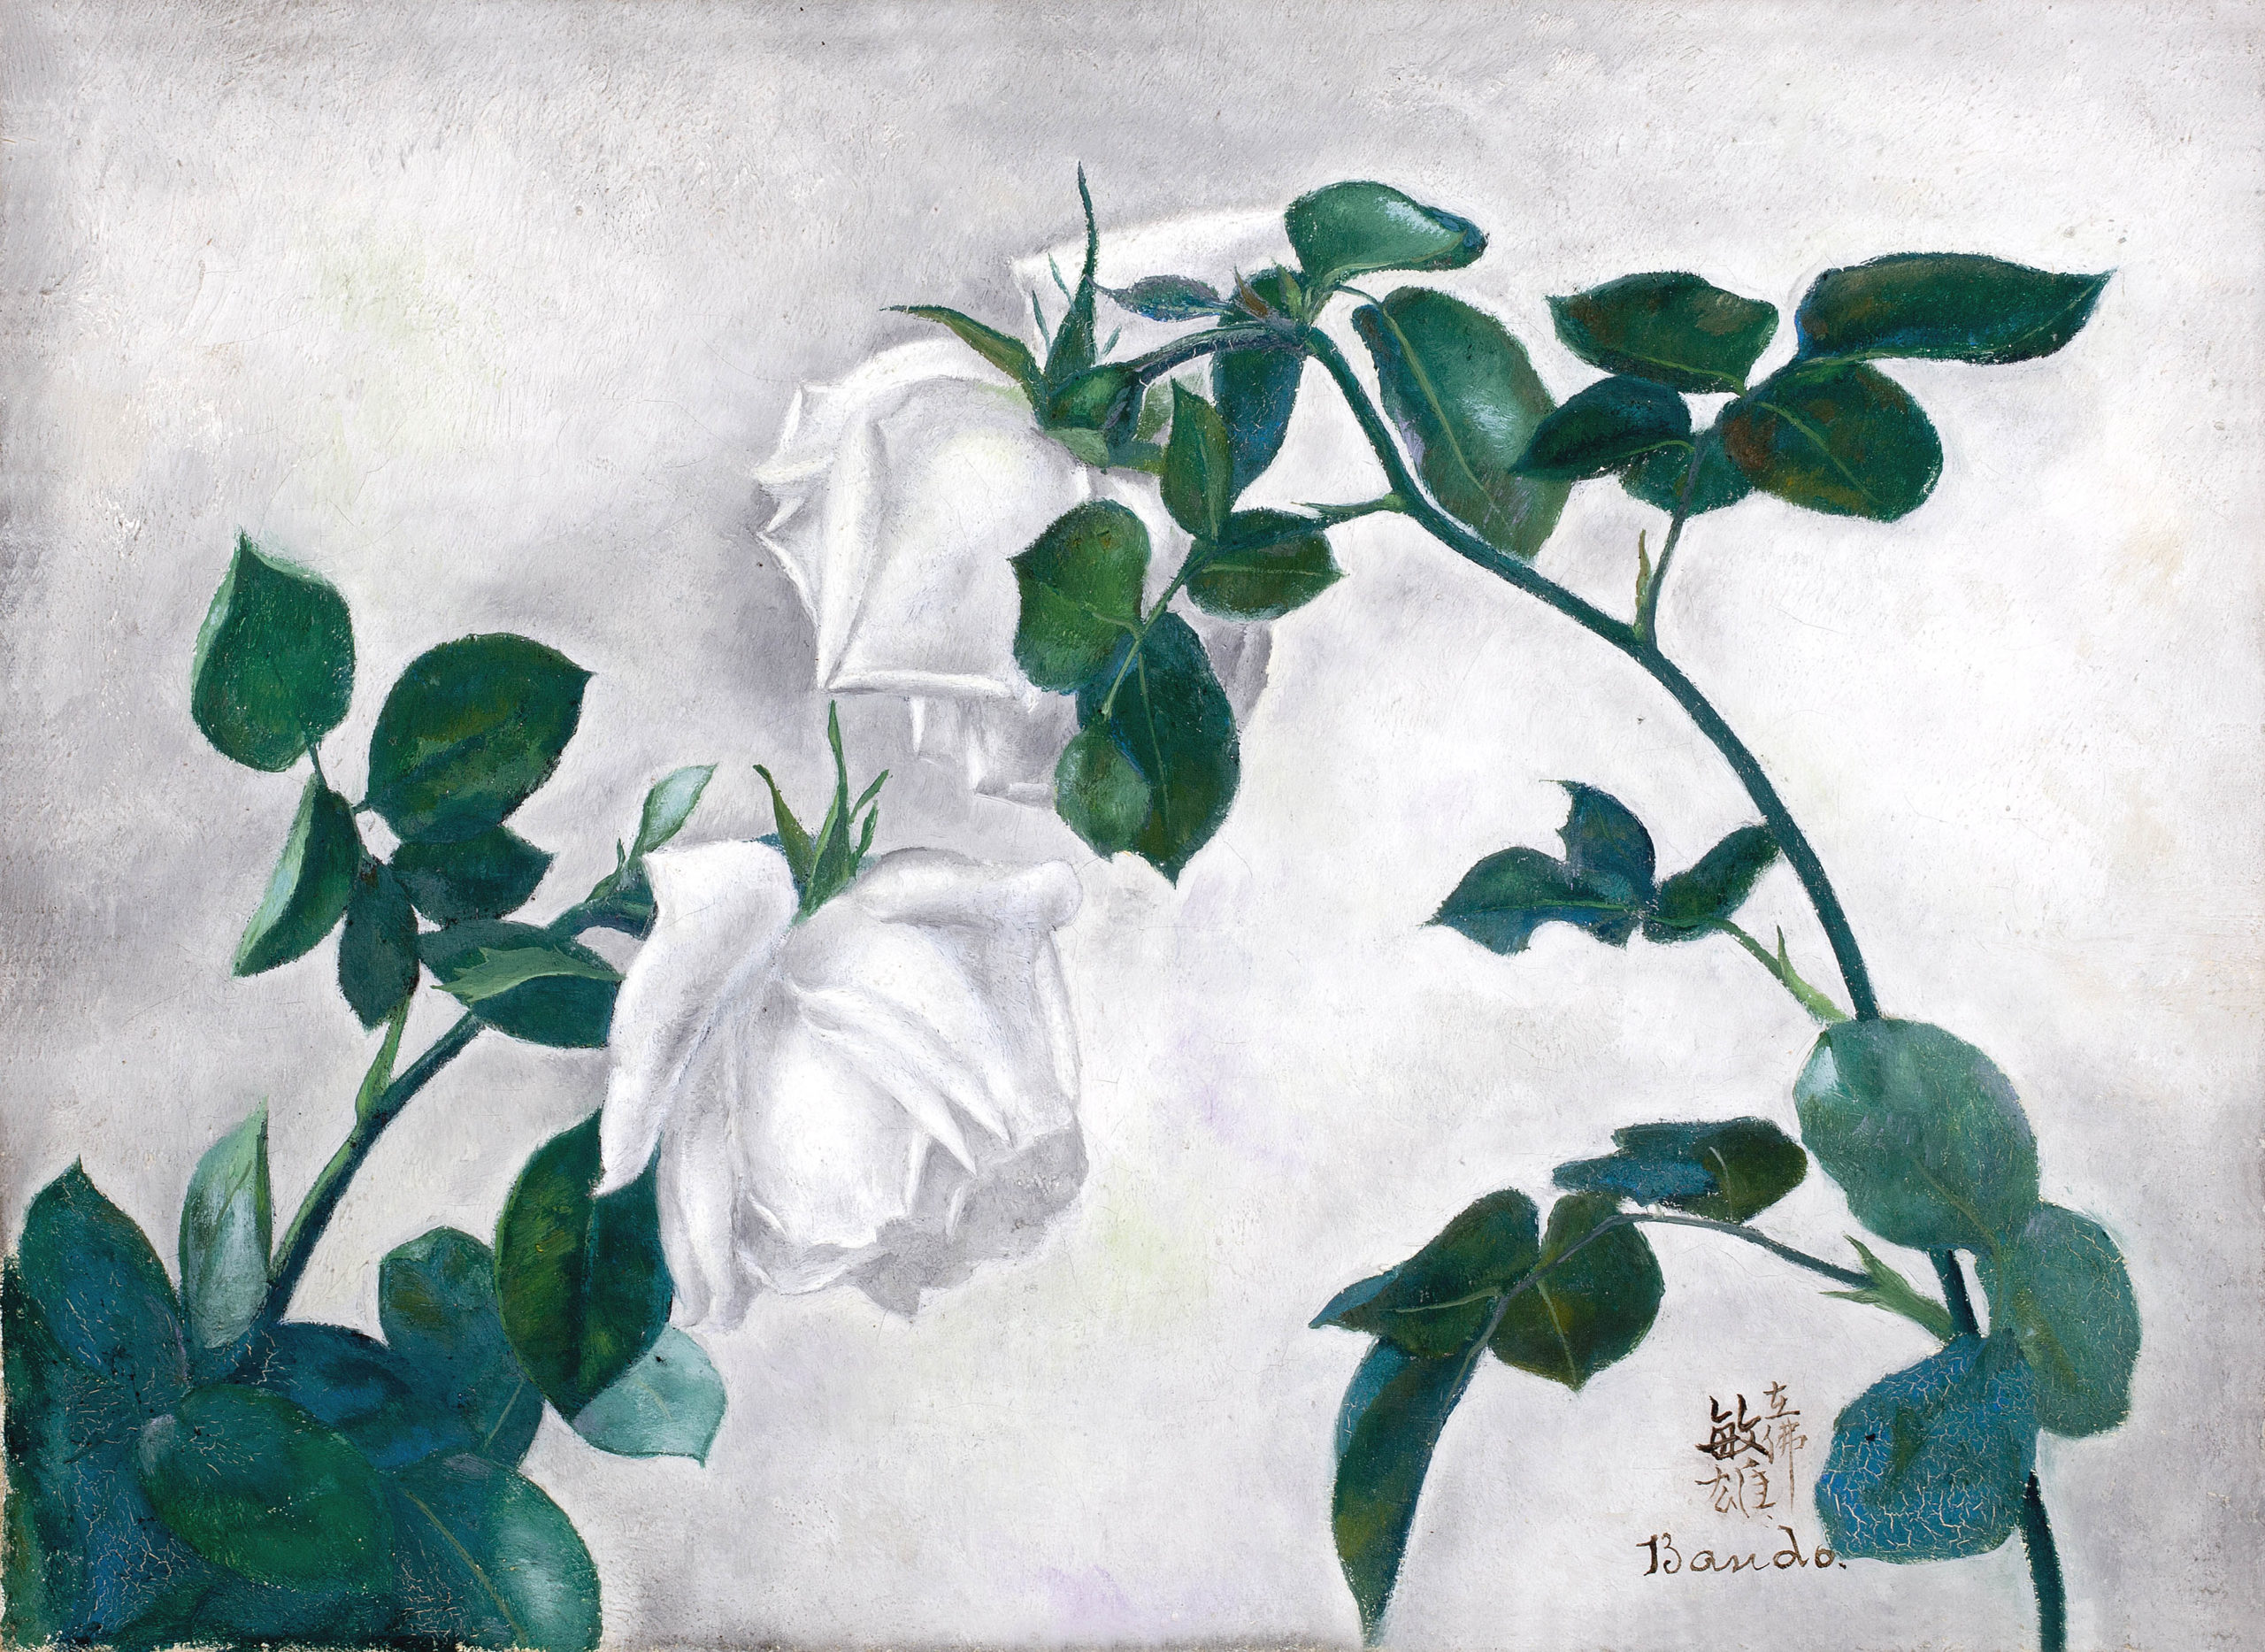 Toshio Bando - Roses blanches 1935 Huile sur toile, The Jariyah Collection Semarang, Indonésie © Jacques Boutersky, Paris